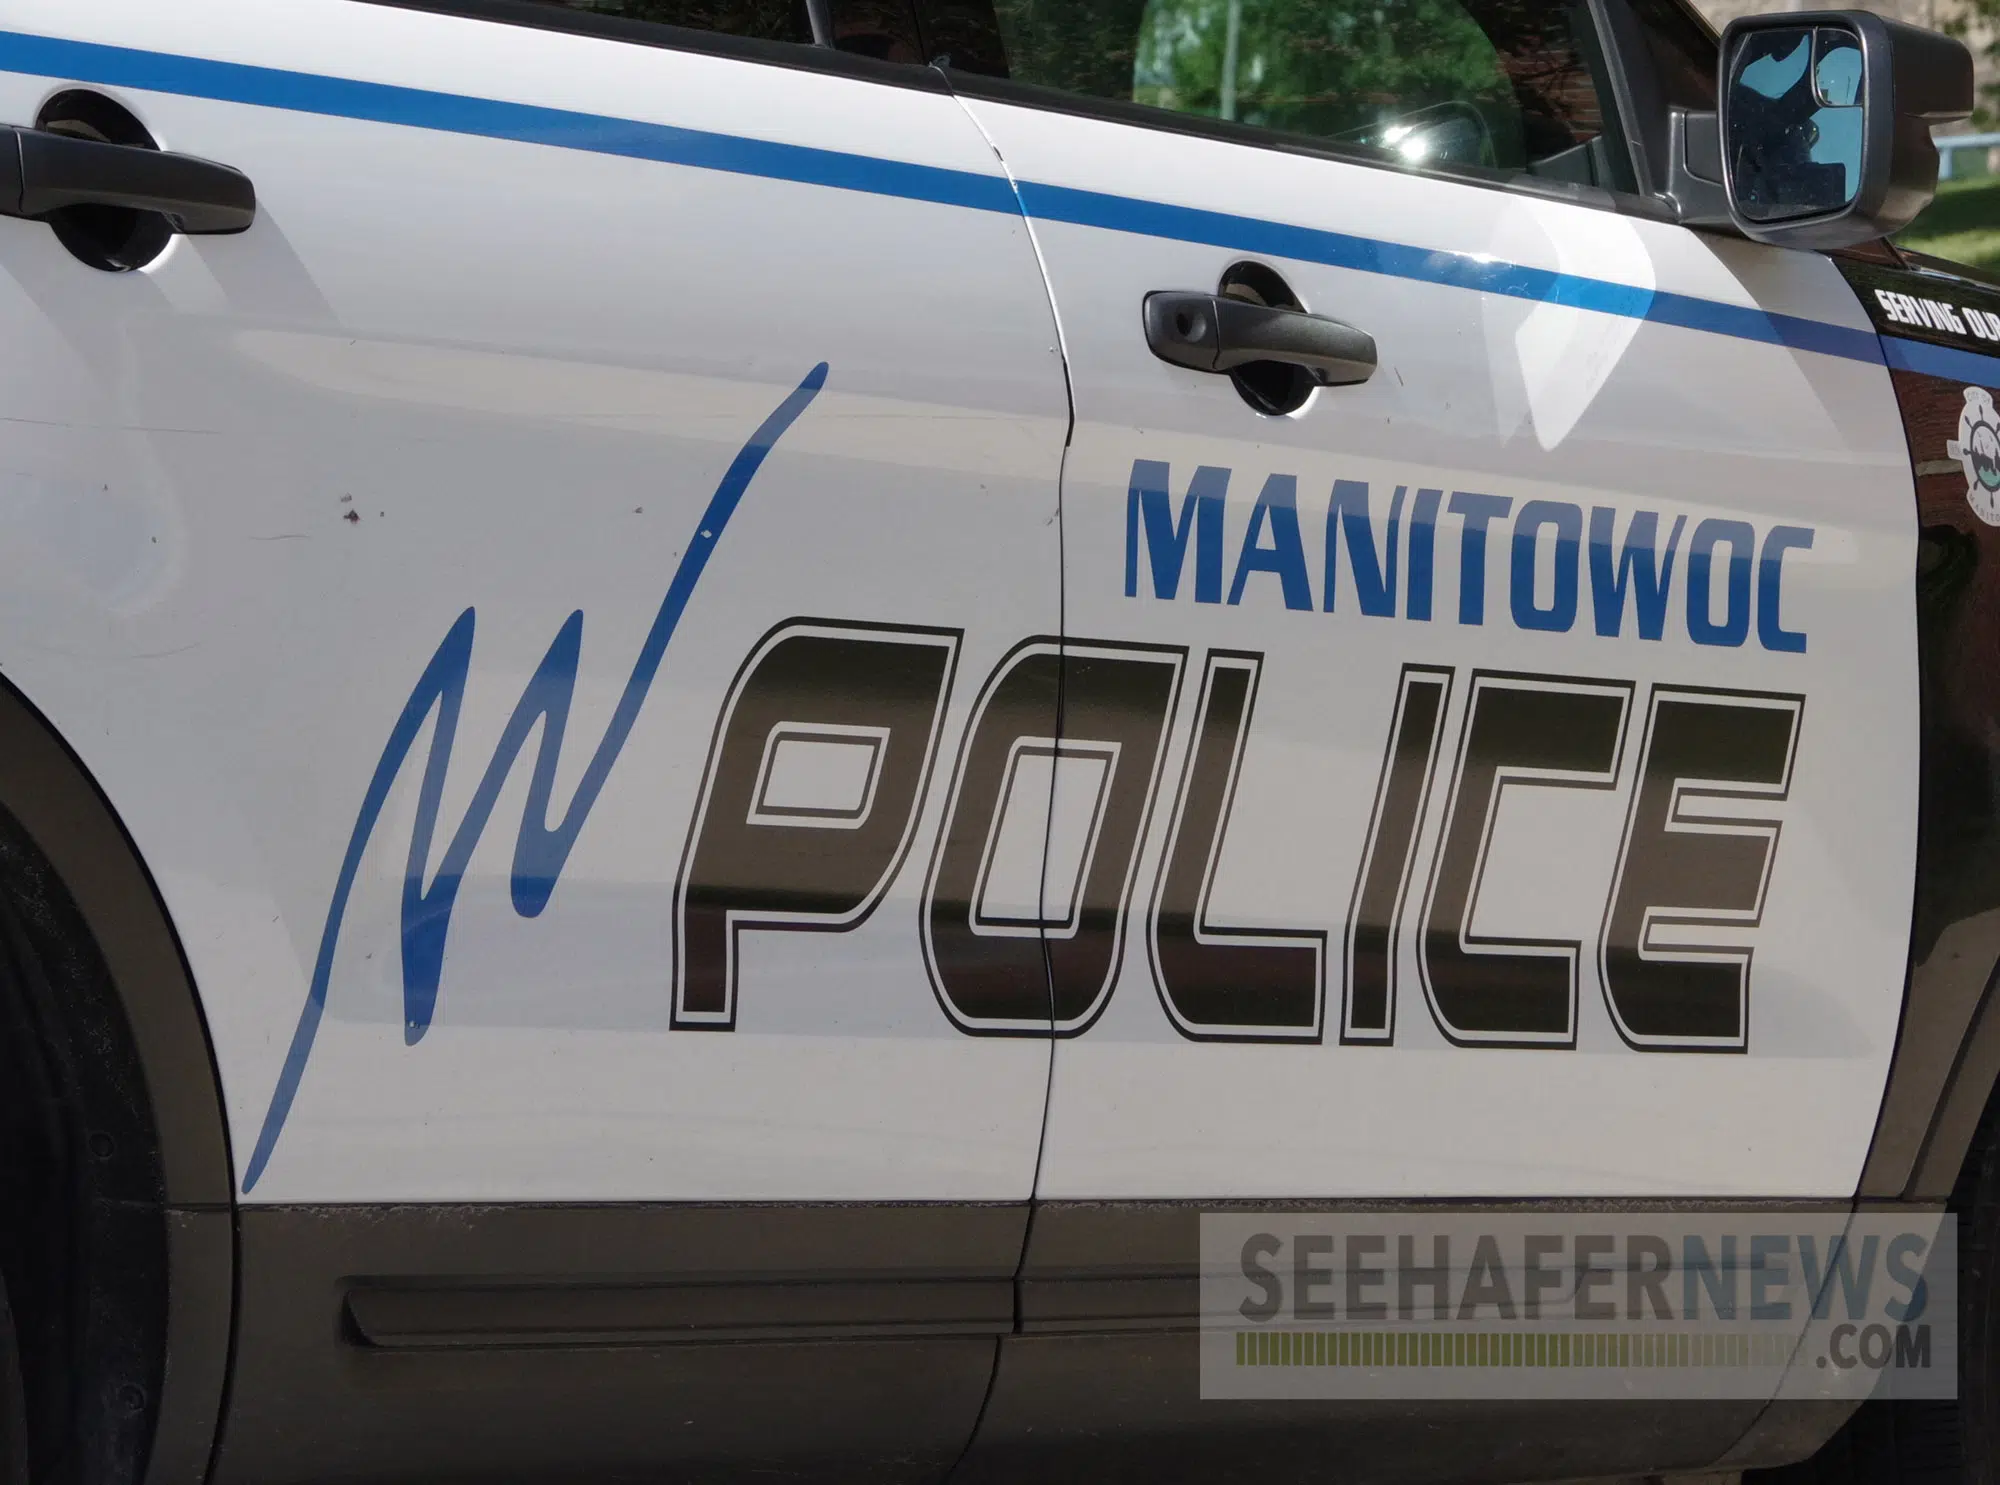 Accident in Manitowoc Leads to Man Being Arrested on 4th OWI Charge